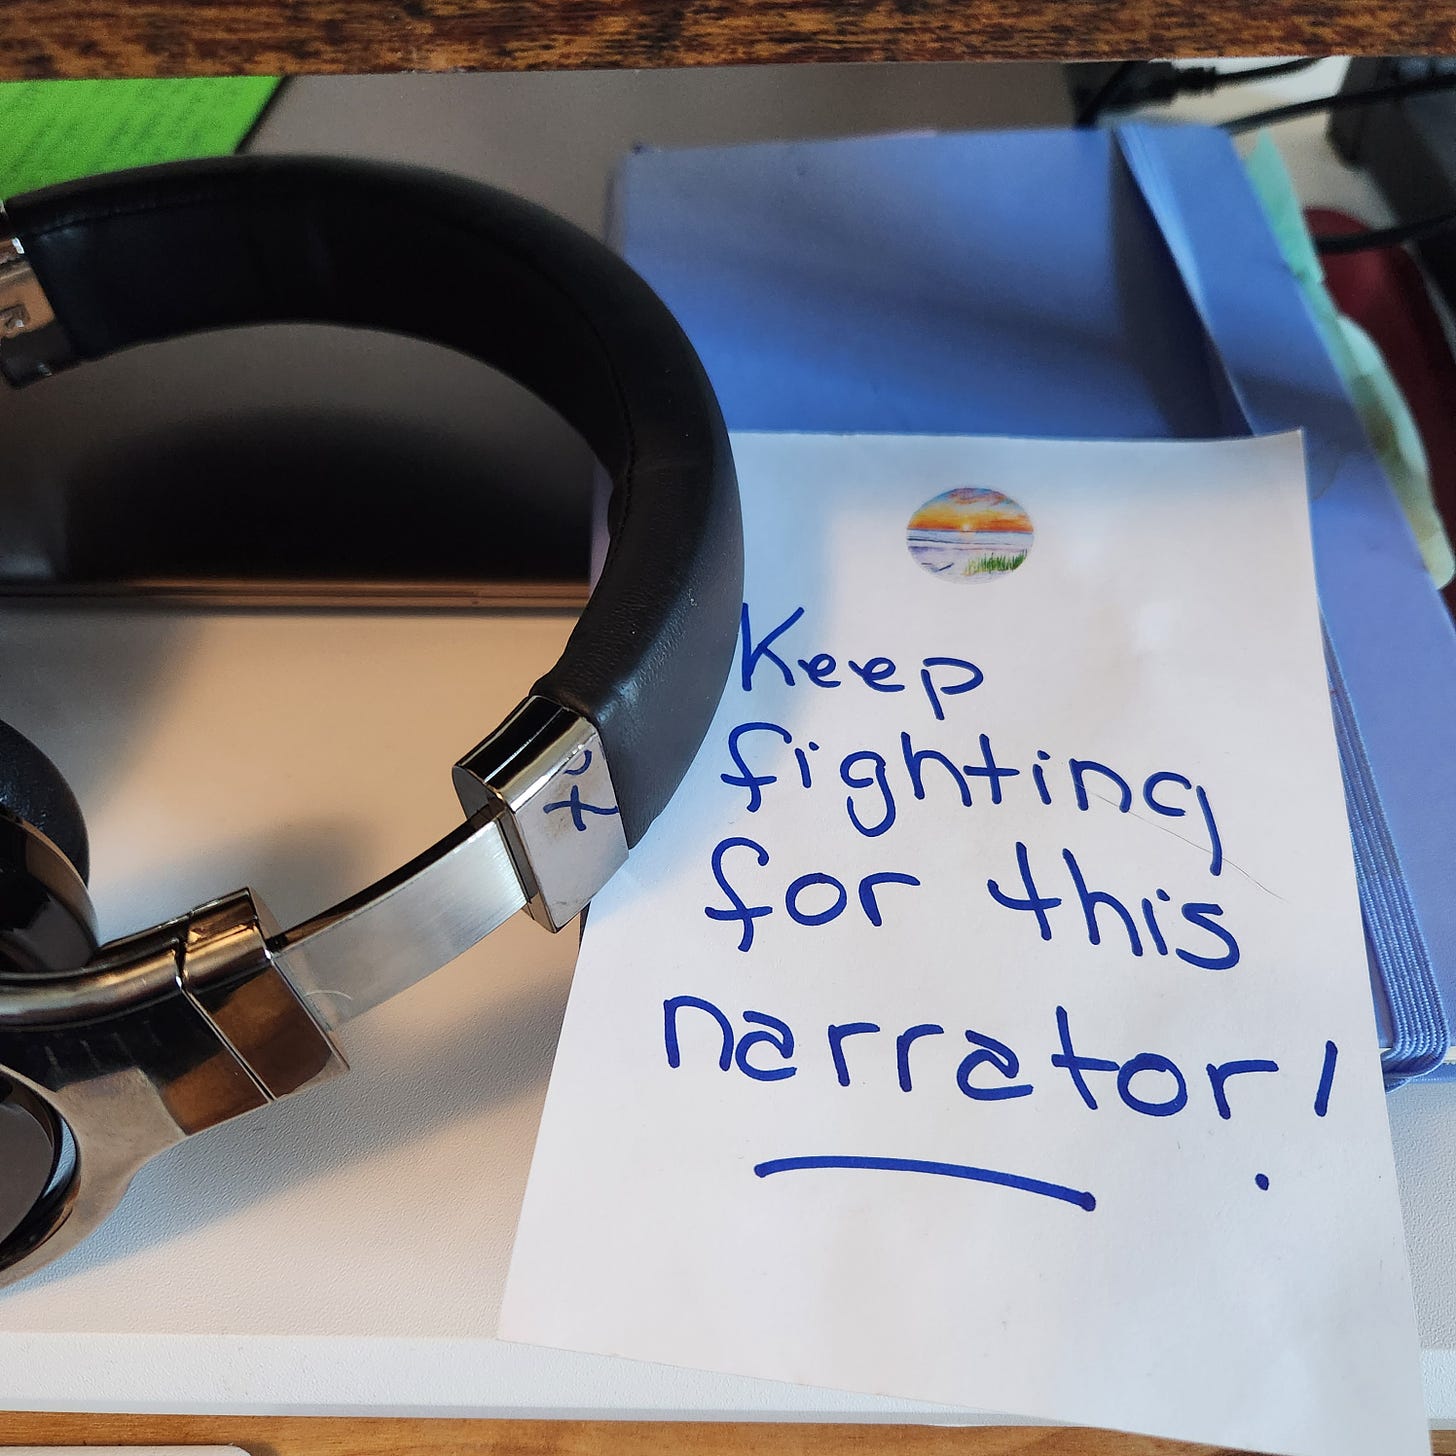 headphones on a laptop next to a note: keep fighting for this narrator